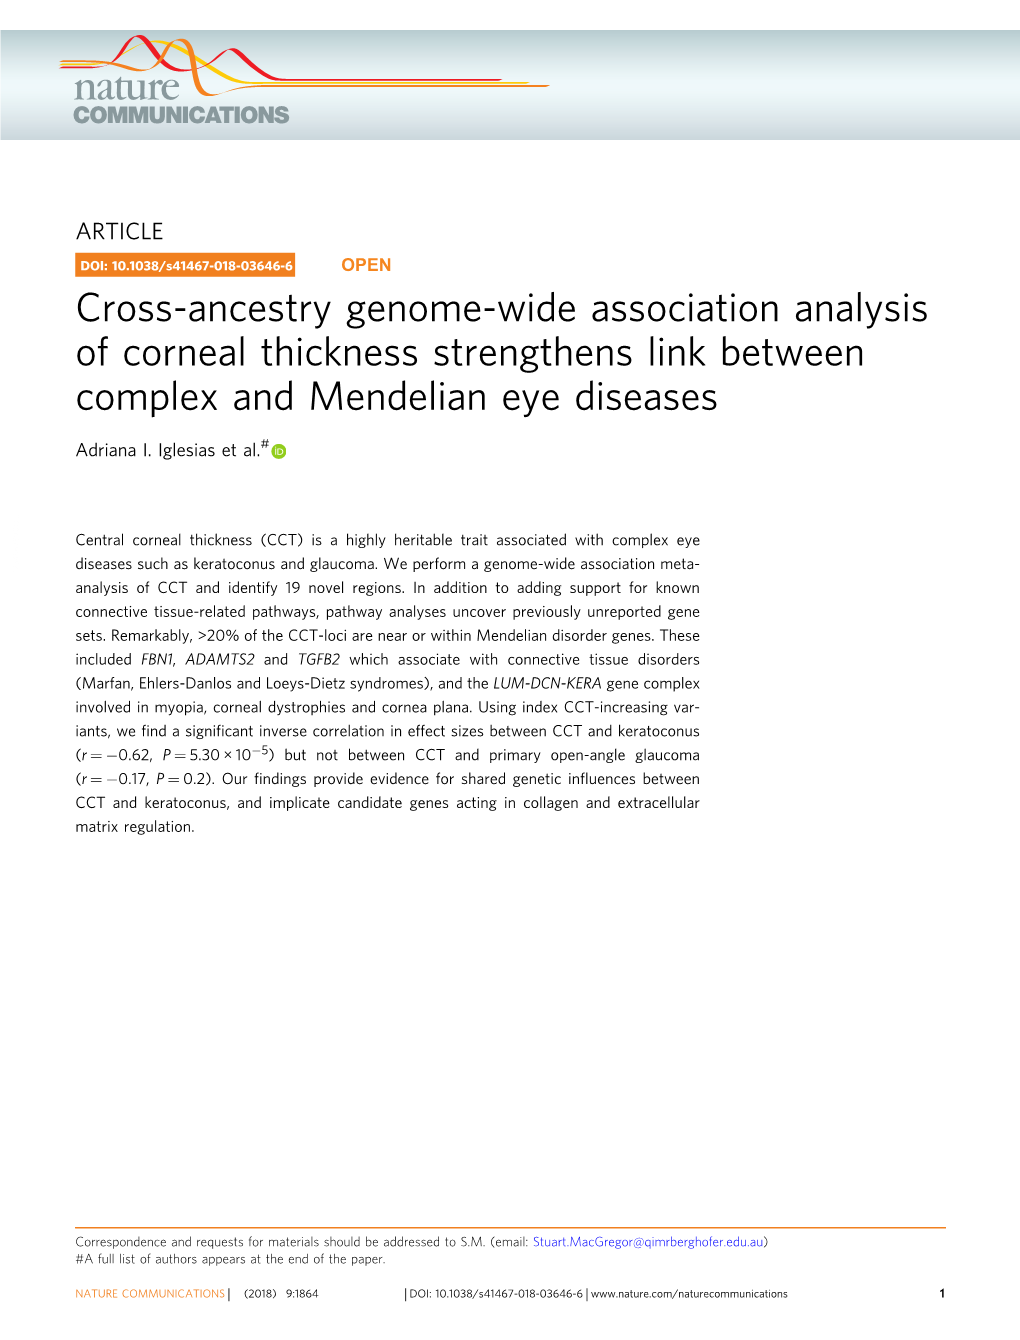 Cross-Ancestry Genome-Wide Association Analysis of Corneal Thickness Strengthens Link Between Complex and Mendelian Eye Diseases